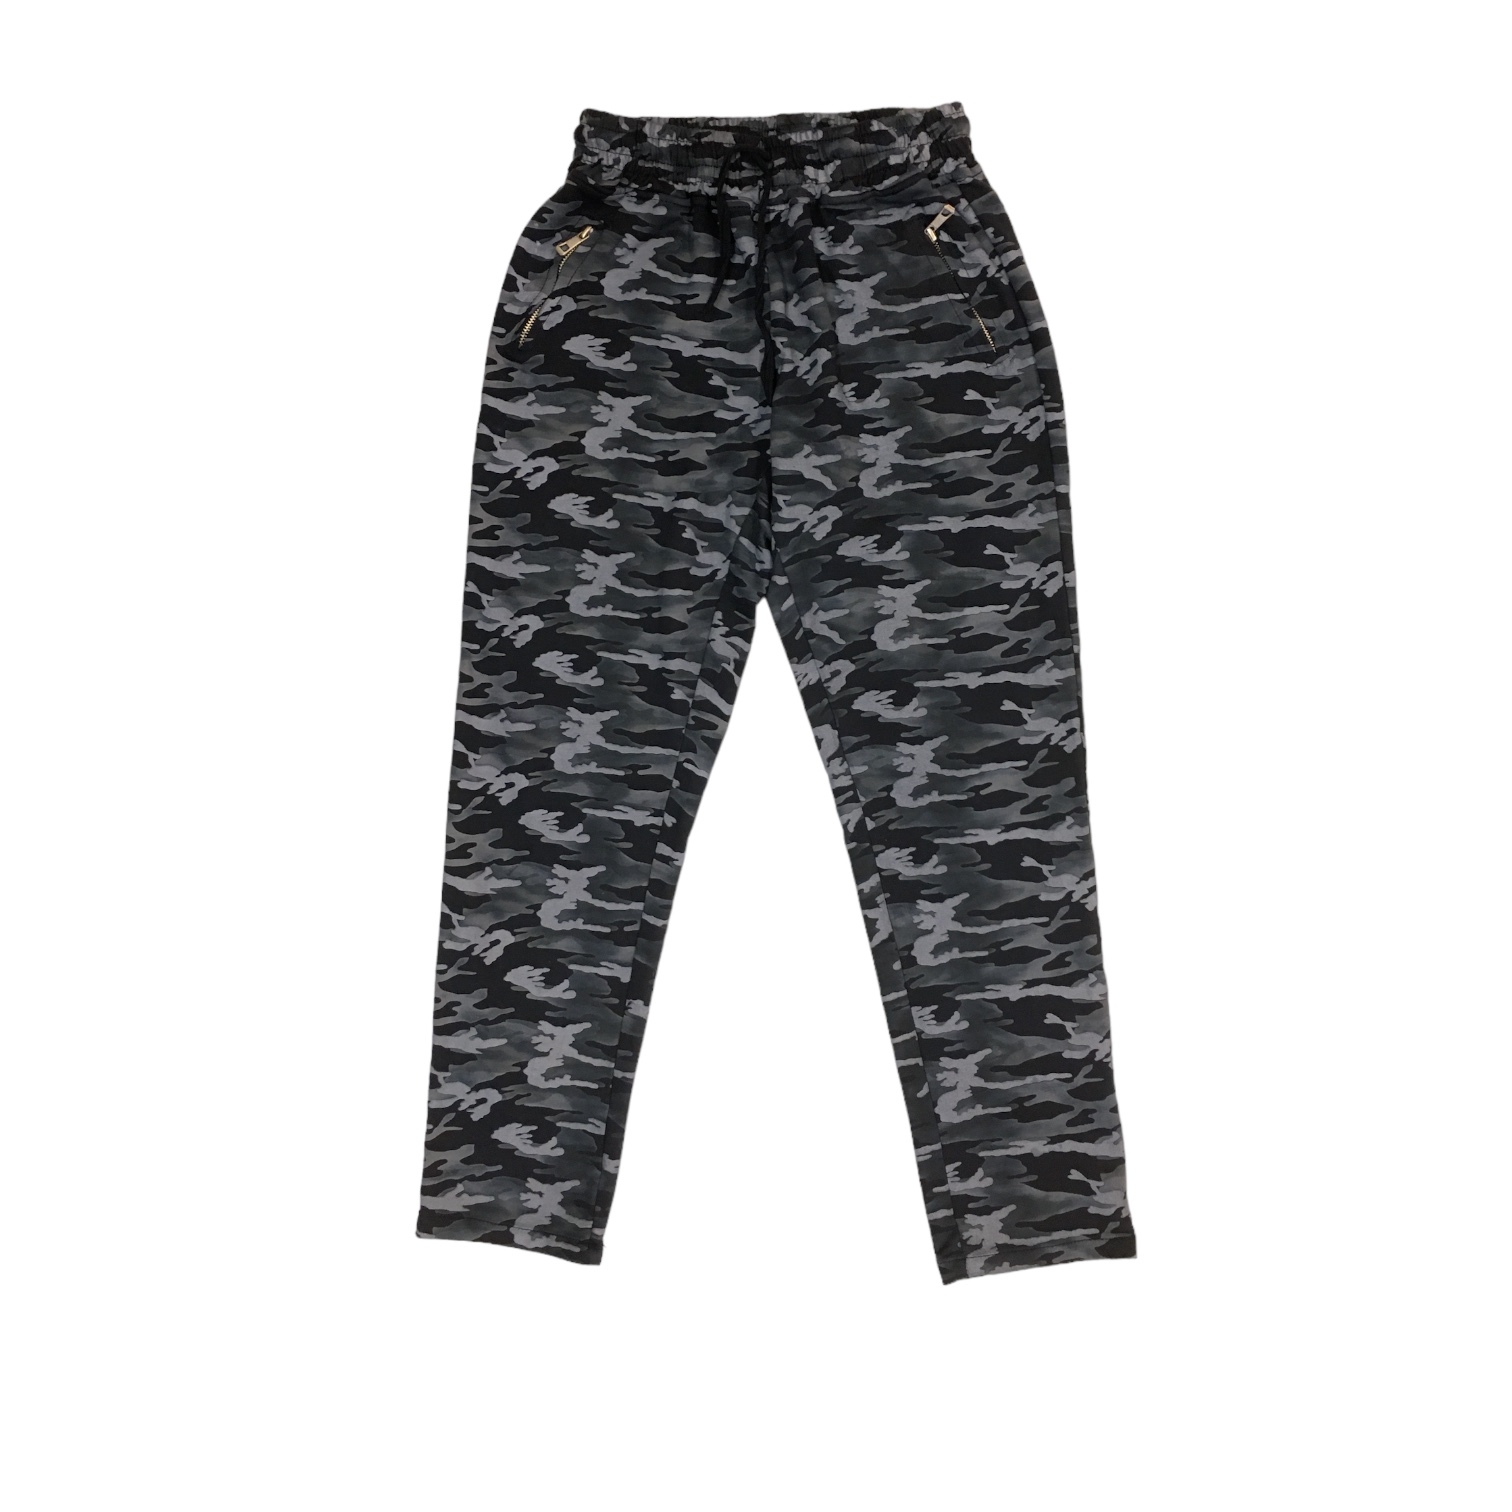 Youngland Athletic Pants